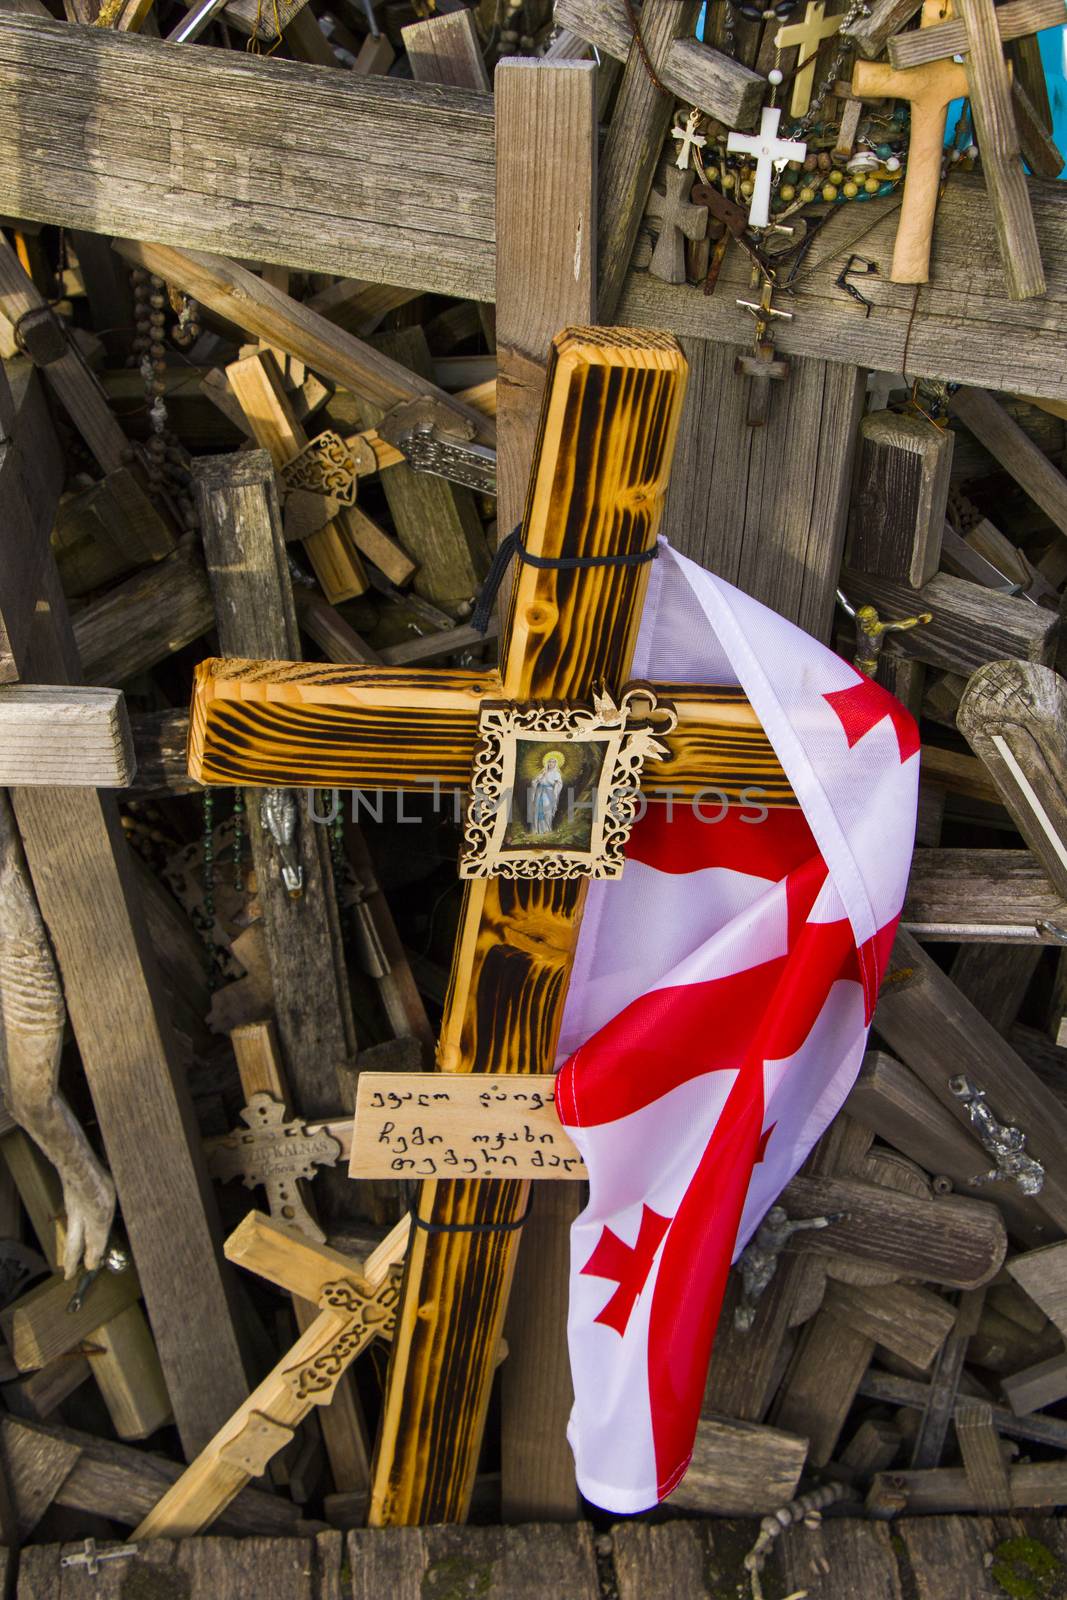 Hill of crosses, large group of crosses on the hill in Lithuania, Famous landmark, must visit place. by Taidundua